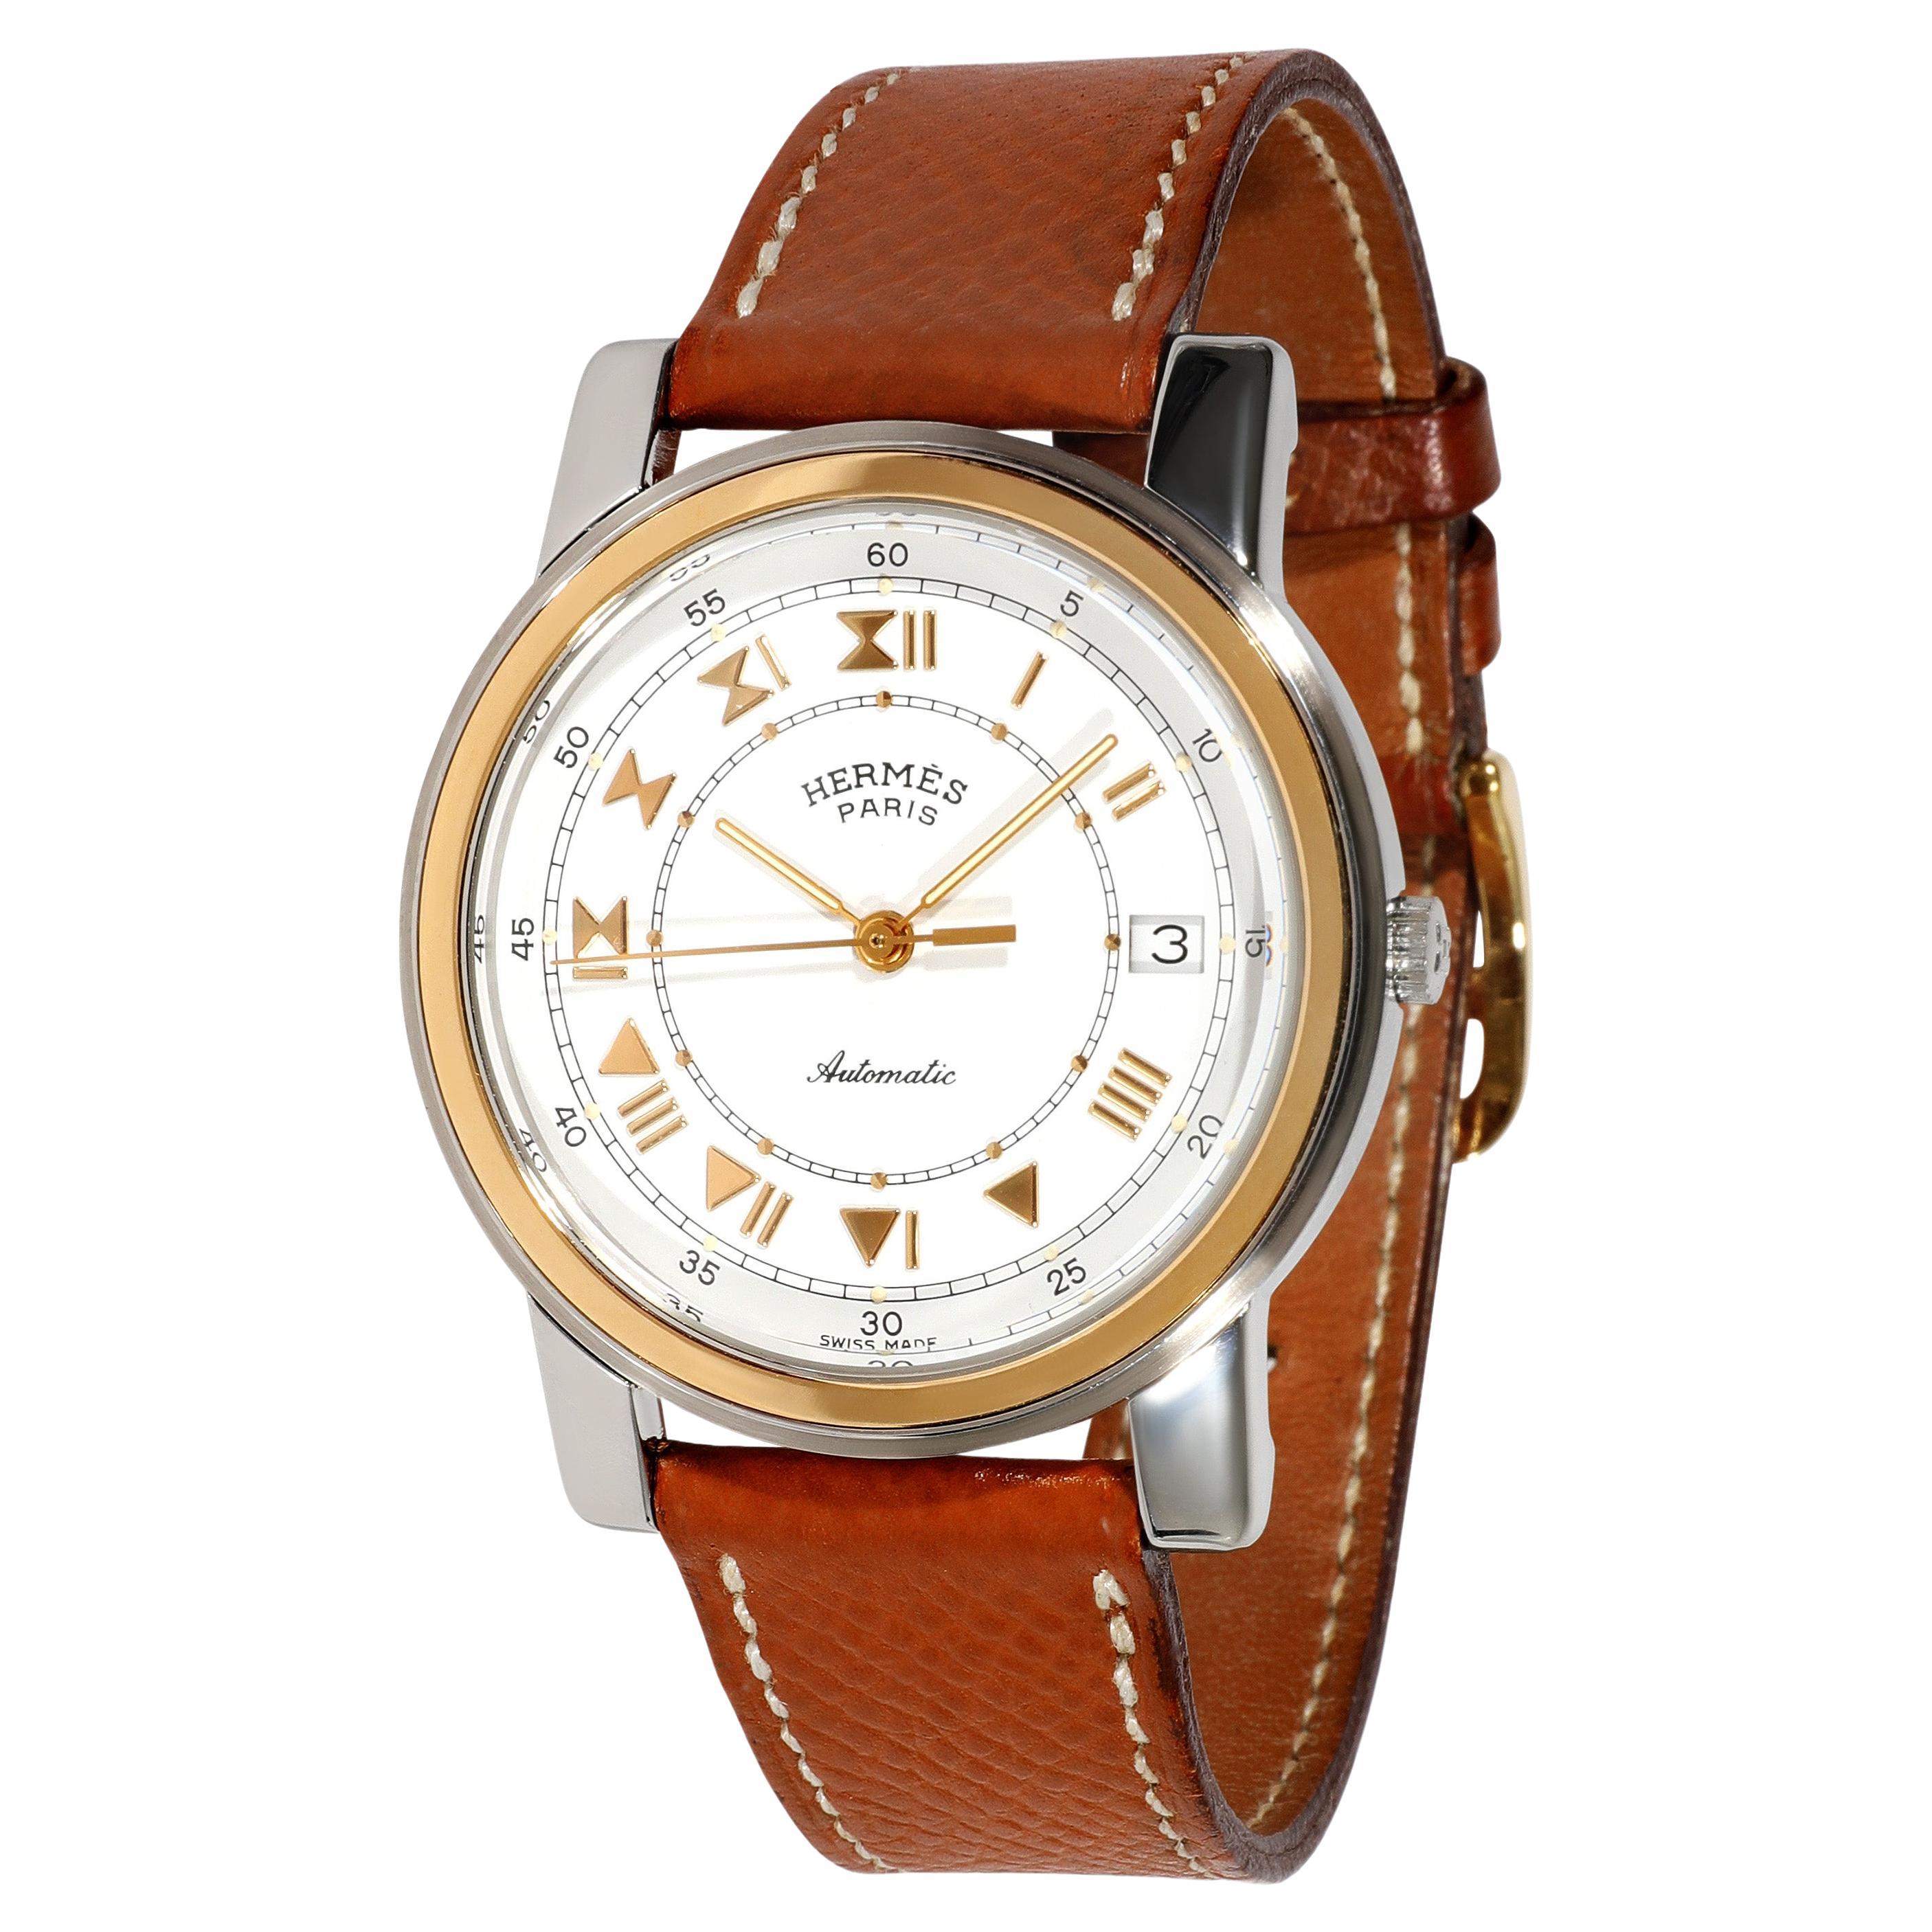 Hermès Carrick 793-TM10063 Unisex Watch in 18kt Stainless Steel/Yellow Gold